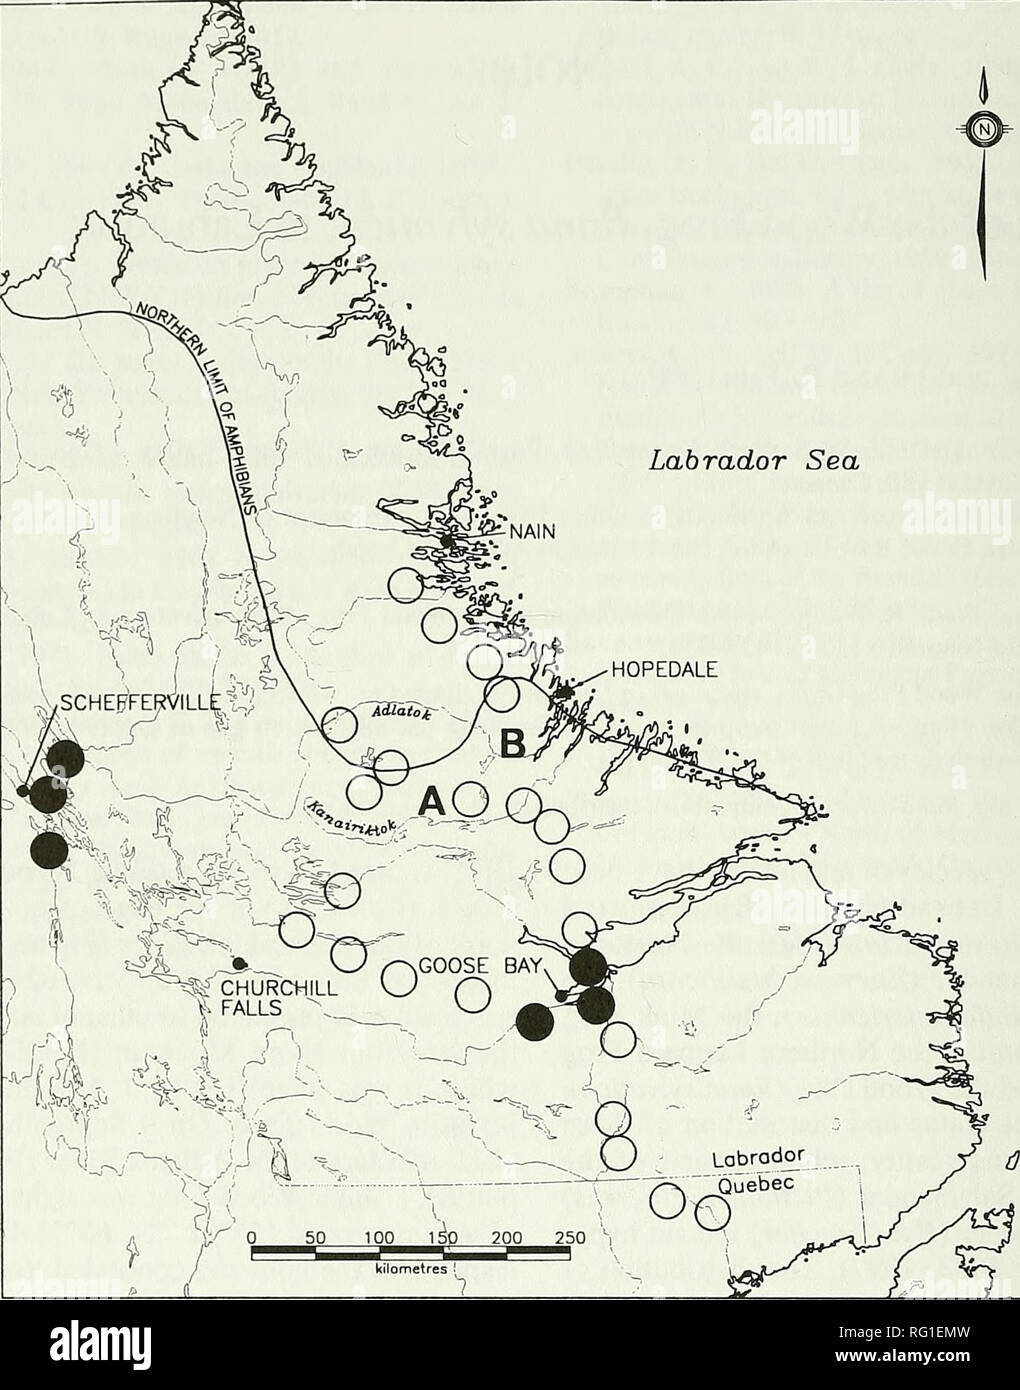 . The Canadian field-naturalist. 330 The Canadian Field-Naturalist Vol. 112 Labrador Sea. Figure 1. Distribution of the Wood Frog in Labrador. Darkened circles show locations described by Maunder (1983). Open circles show search areas with A and B indicat- ing confirmed sightings on the Kanairiktok and Adlatok rivers respectively. Northern limit of Amphibians after Maunder (1983). lated populations along the northern edge of the mid- subarctic forest ecoregion. As indicated by Maunder (1997), further study is required to precisely deter- mine the distribution of amphibians in Labrador. Acknowl Stock Photo